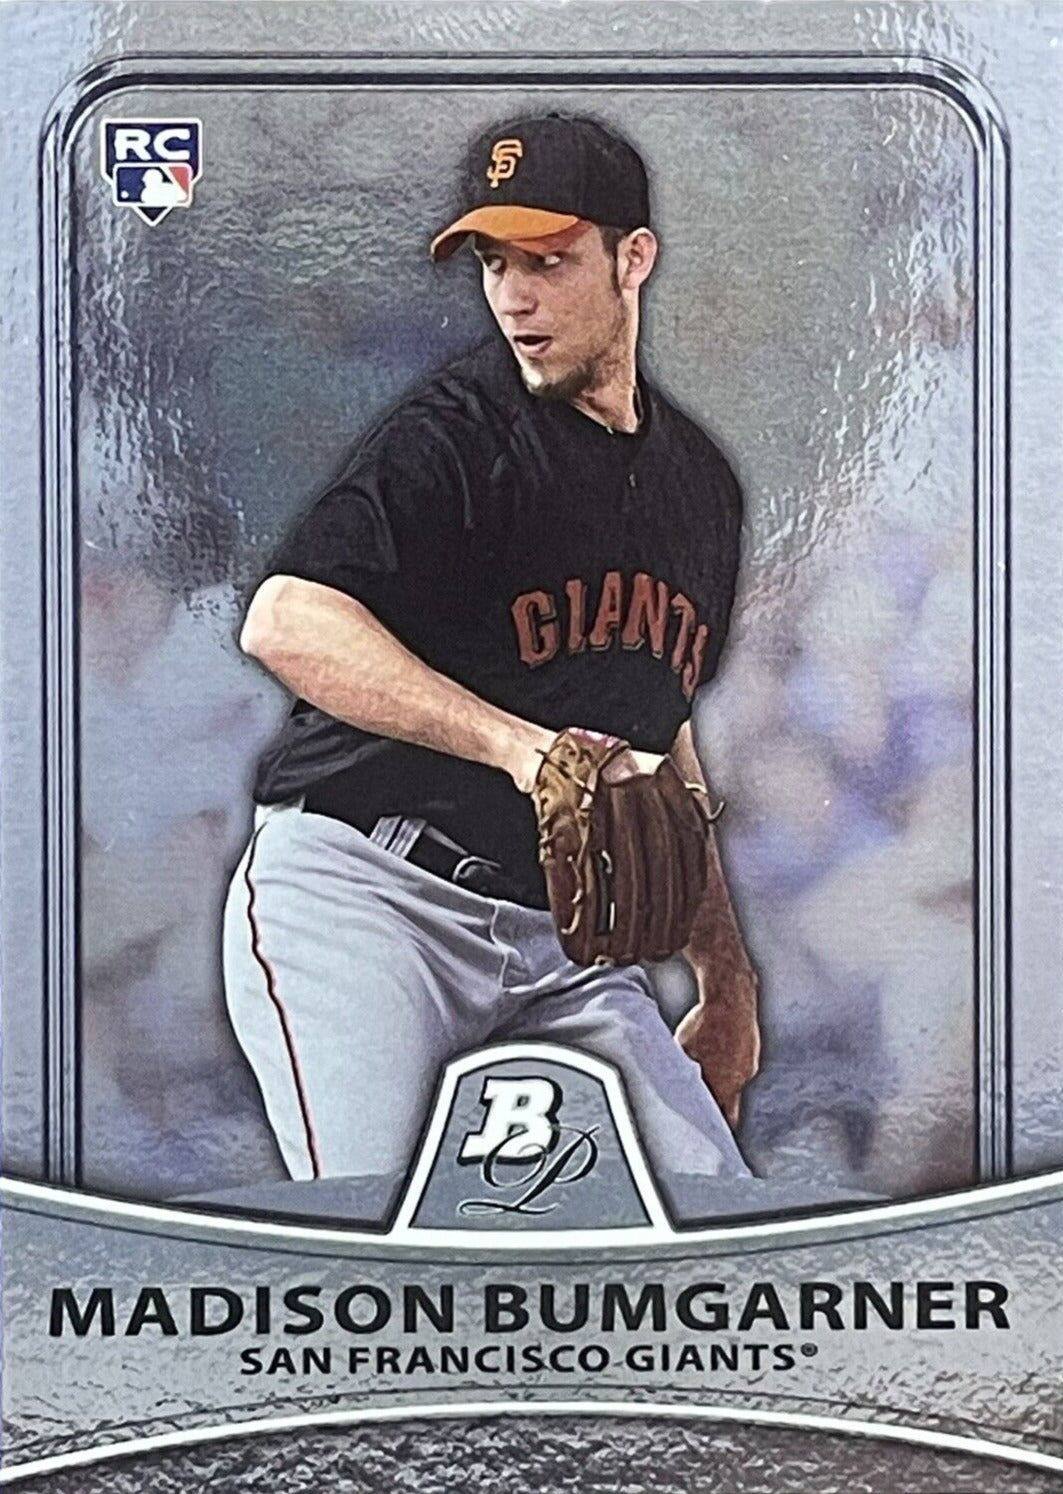 Madison Bumgarner Rookie Baseball Card 2010 Topps Mint Condition